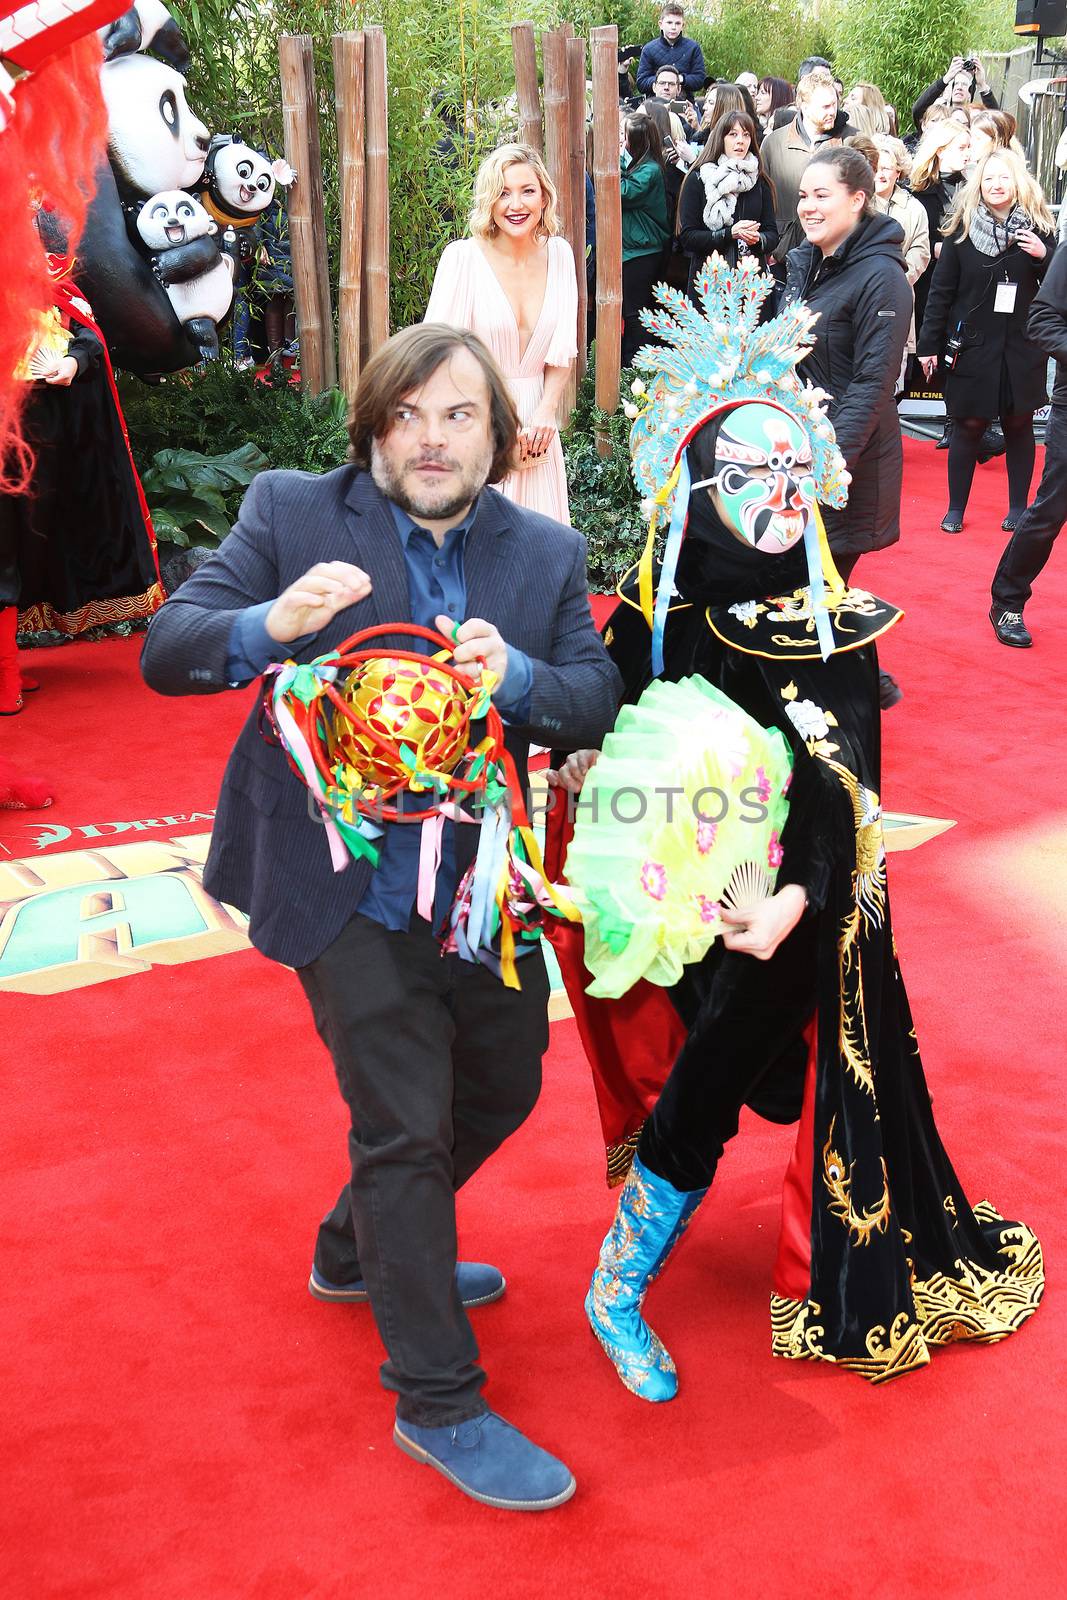 UNITED KINGDOM, London: Jack Black attends Kung Fu Panda 3 - European premiere at Leicester Square in London on March 6, 2016.